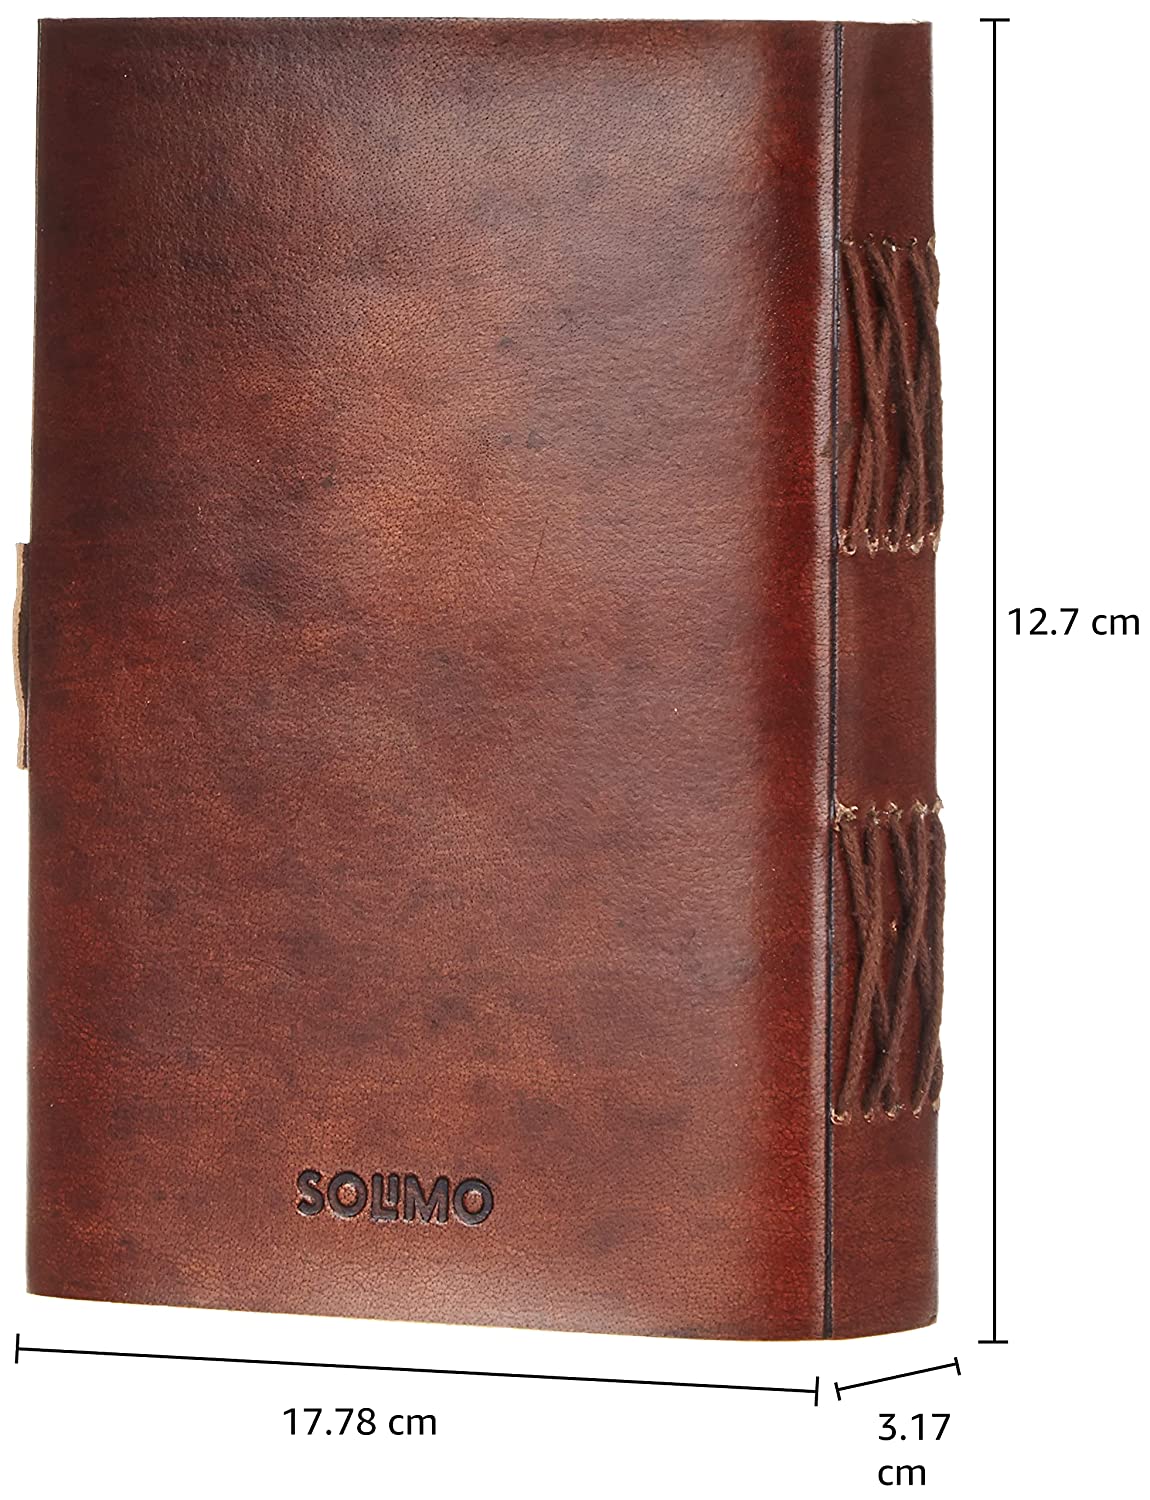 Handcrafted Leather Journal Embossed with a Tree Design with Vintage Lock